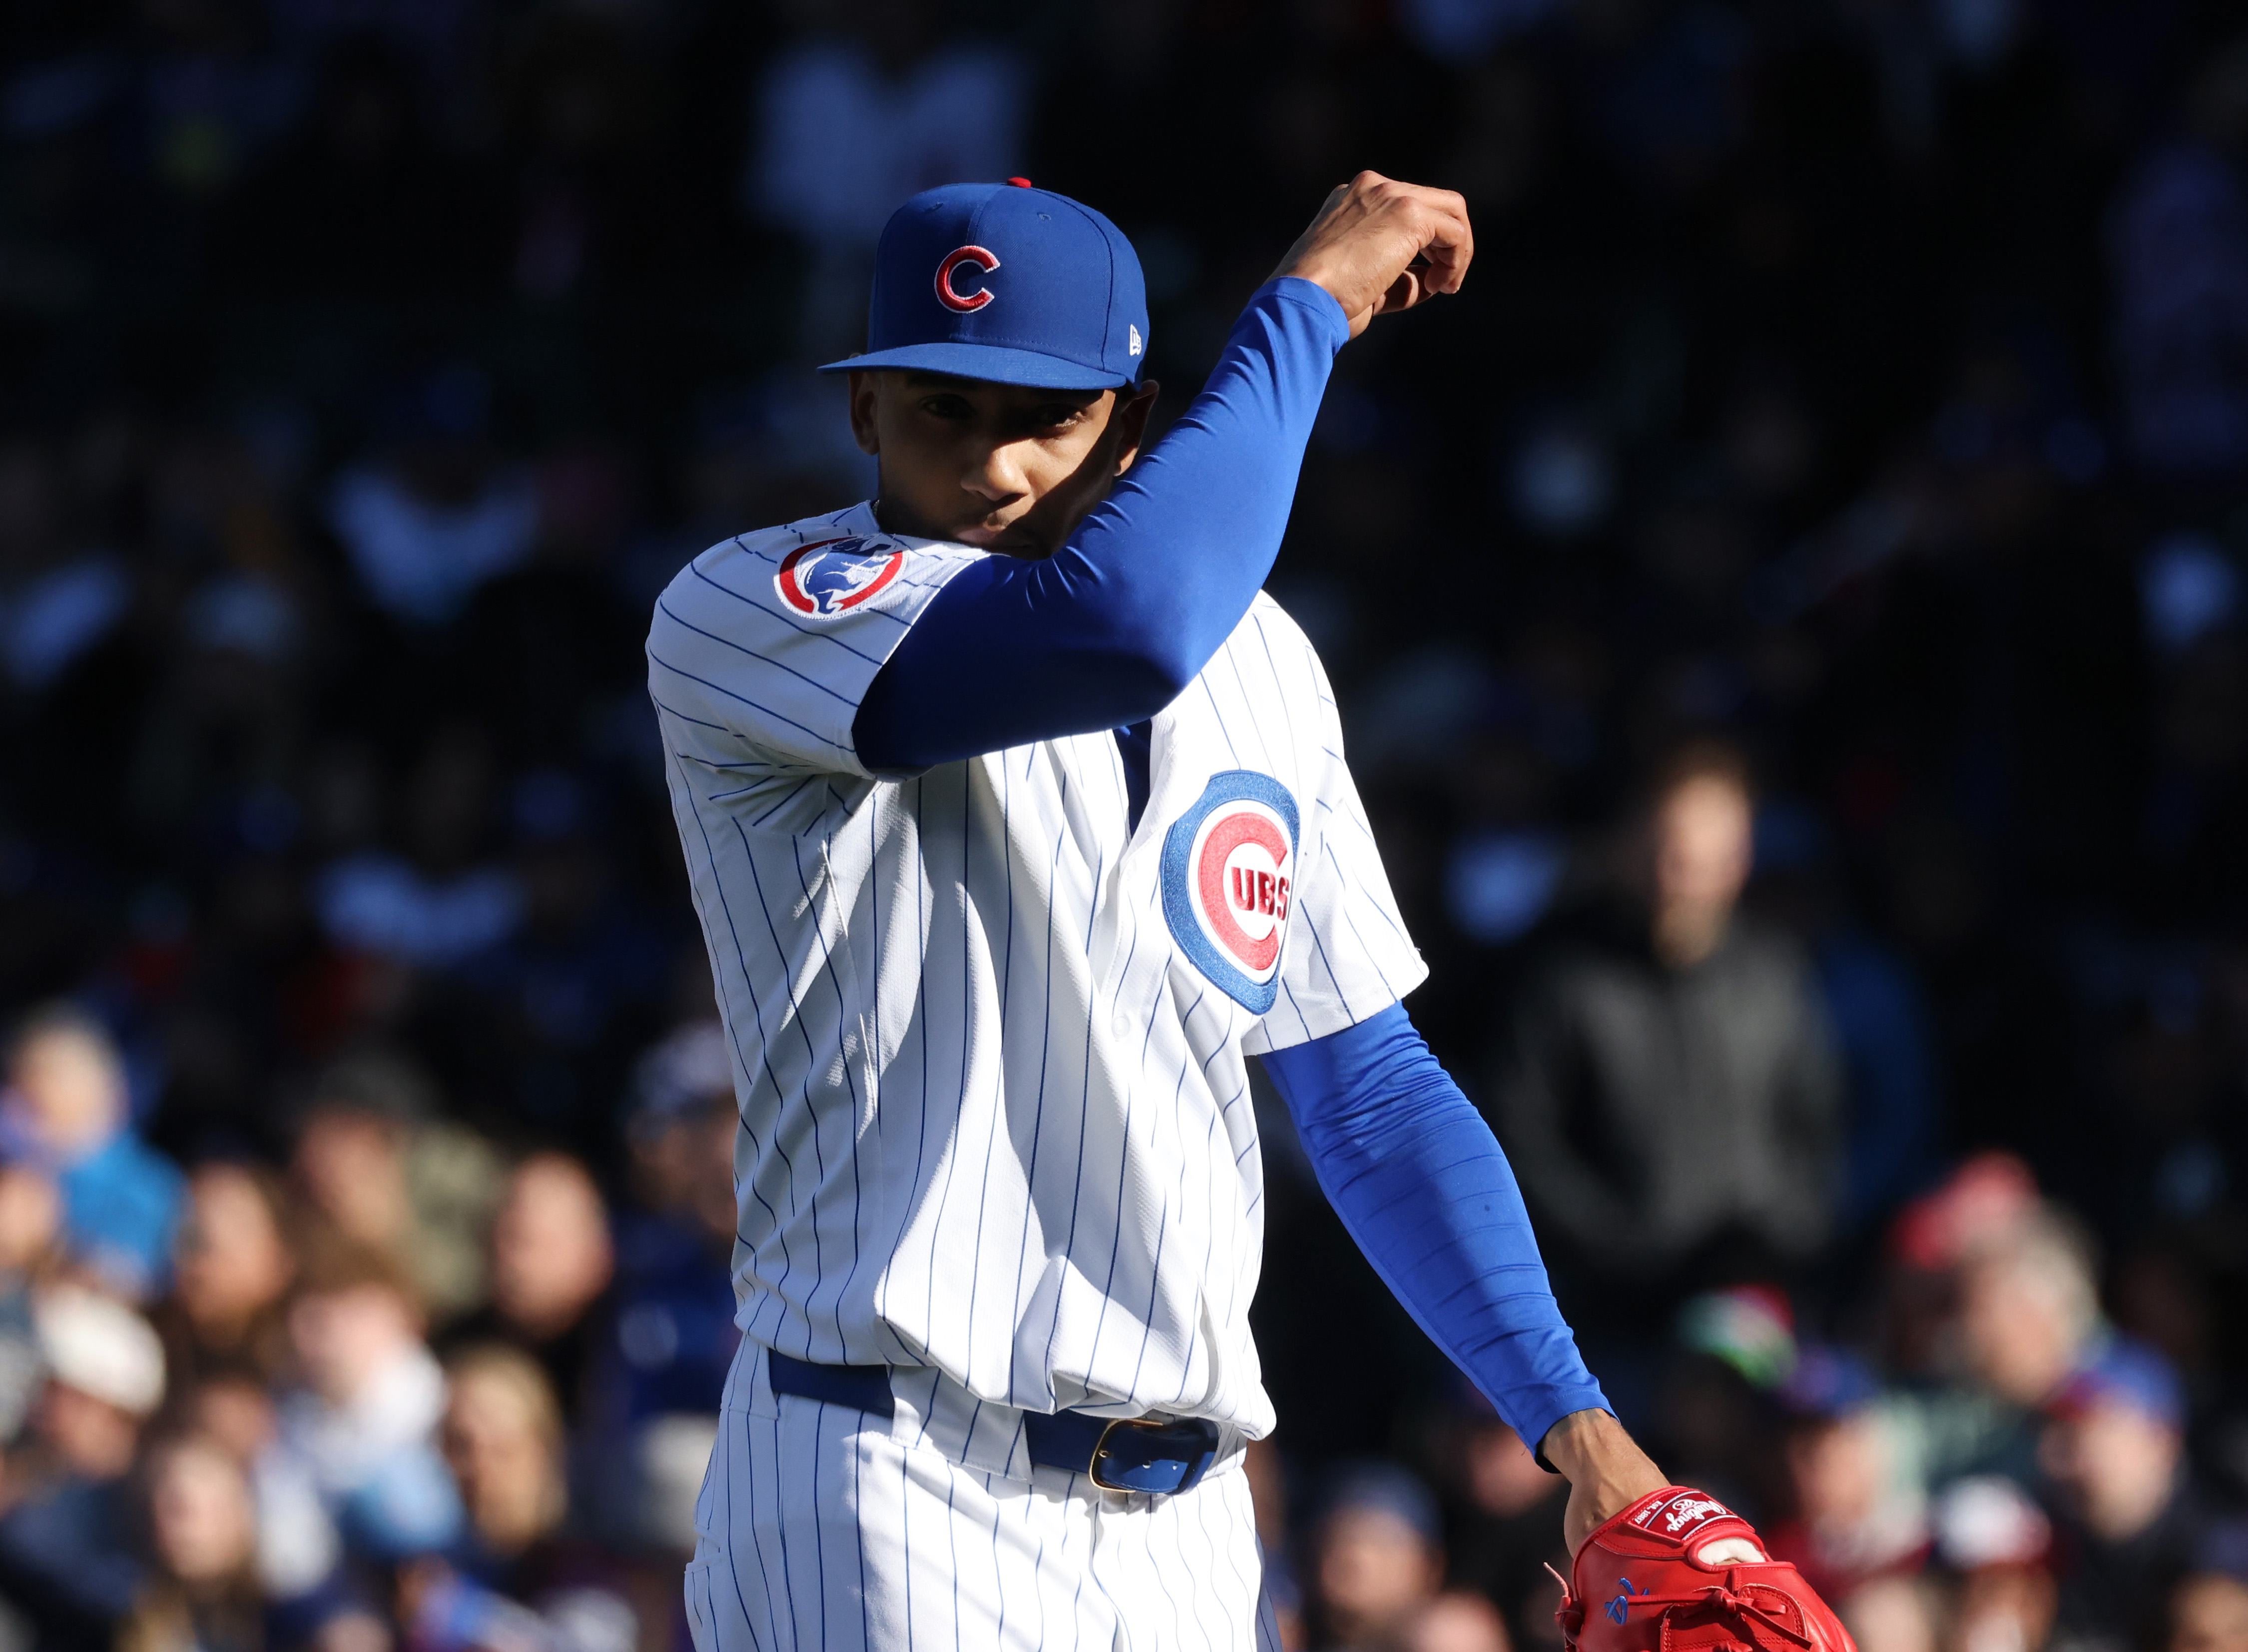 Cubs relief pitcher Jose Cuas heads to the dugout after throwing in the fifth inning against the Dodgers at Wrigley Field on April 6, 2024, in Chicago. Cuas gave up three runs in the inning. (John J. Kim/Chicago Tribune)